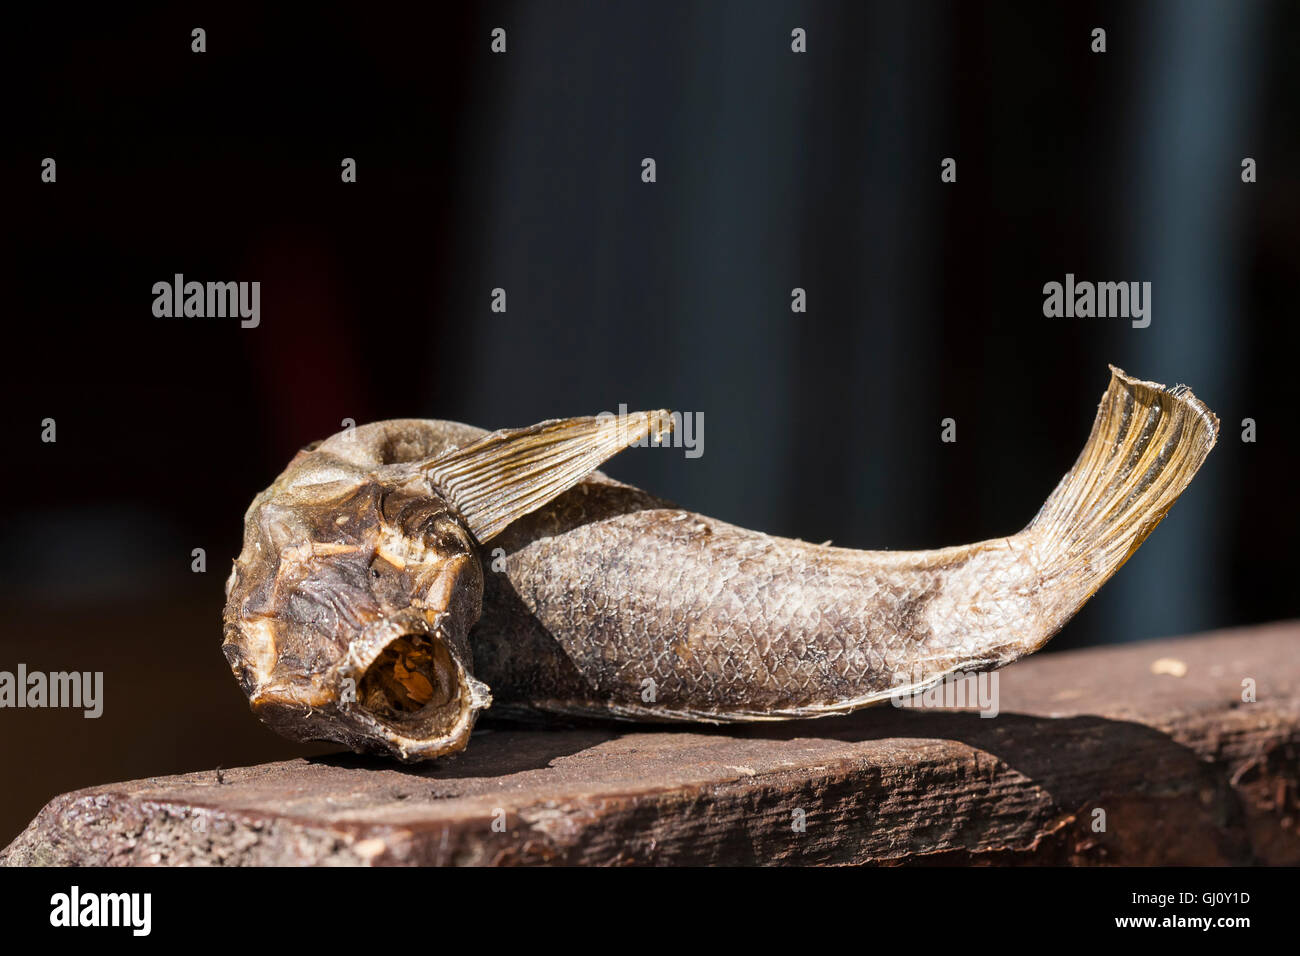 Closeup of a dried up small fish on a timber board Stock Photo